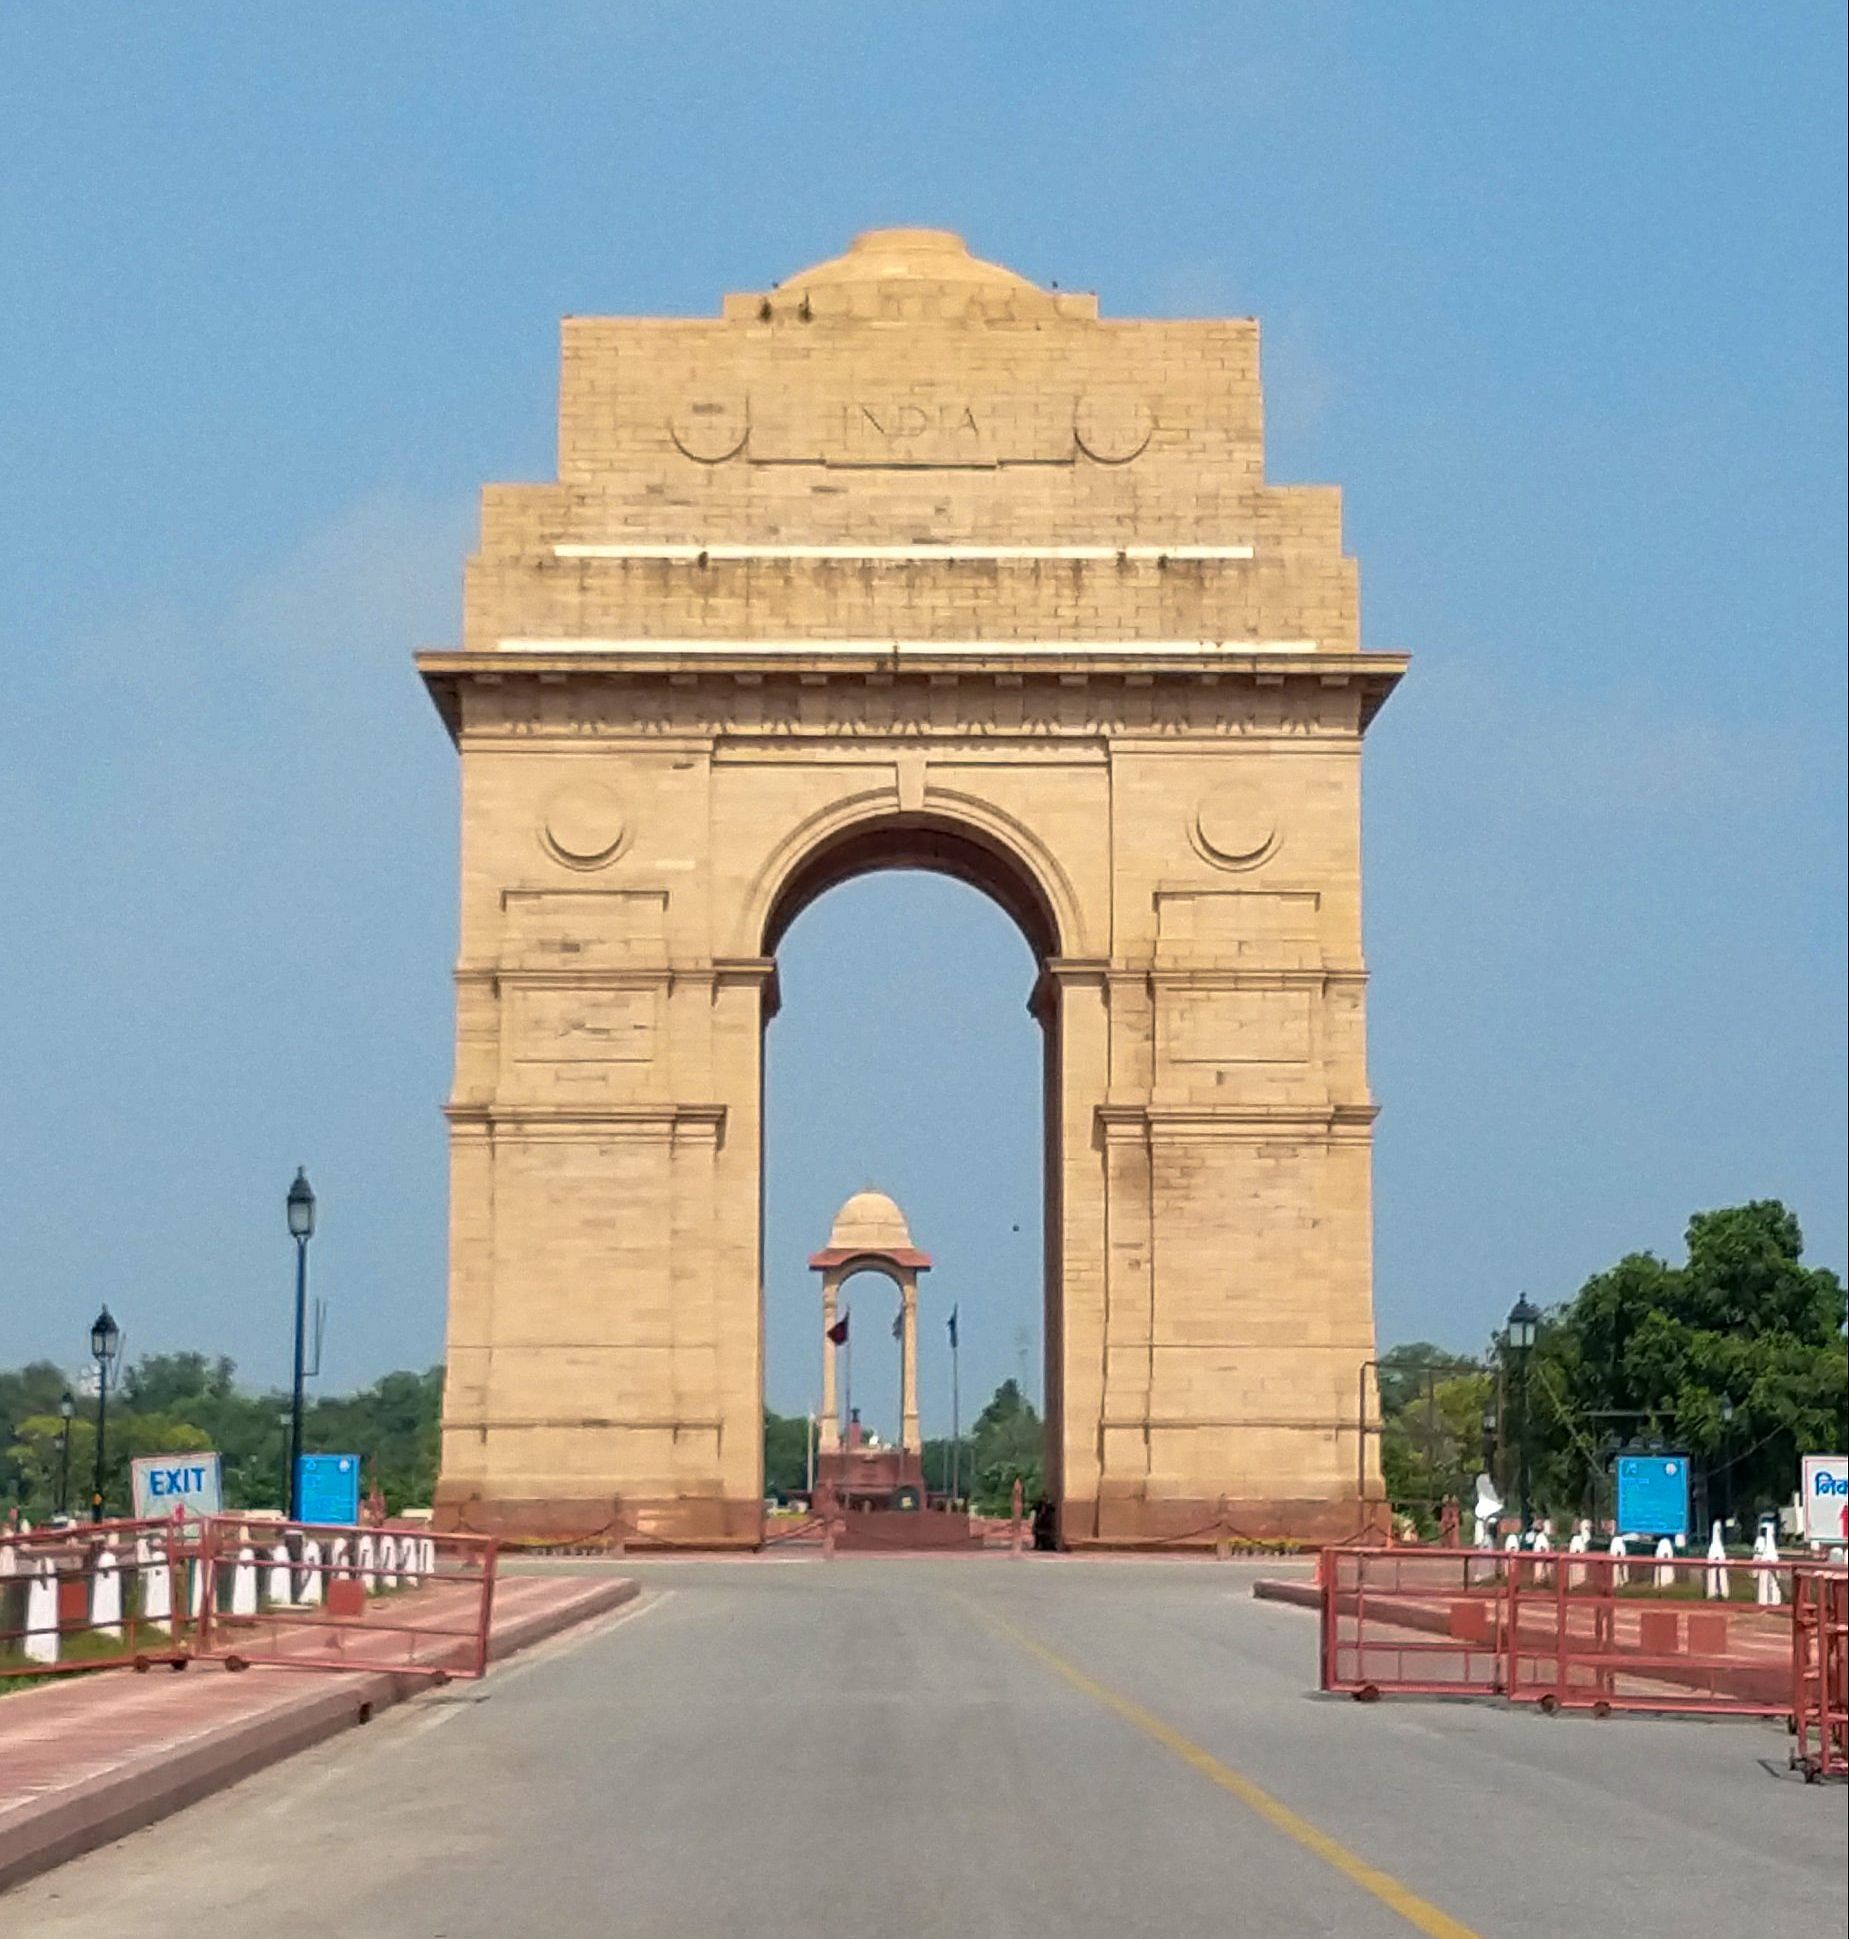 Pre-Covid, it would be impossible to get this clear, unobstructed view of India Gate in the evening, because of the crowds of people | Photo: Shubhangi Misra | ThePrint